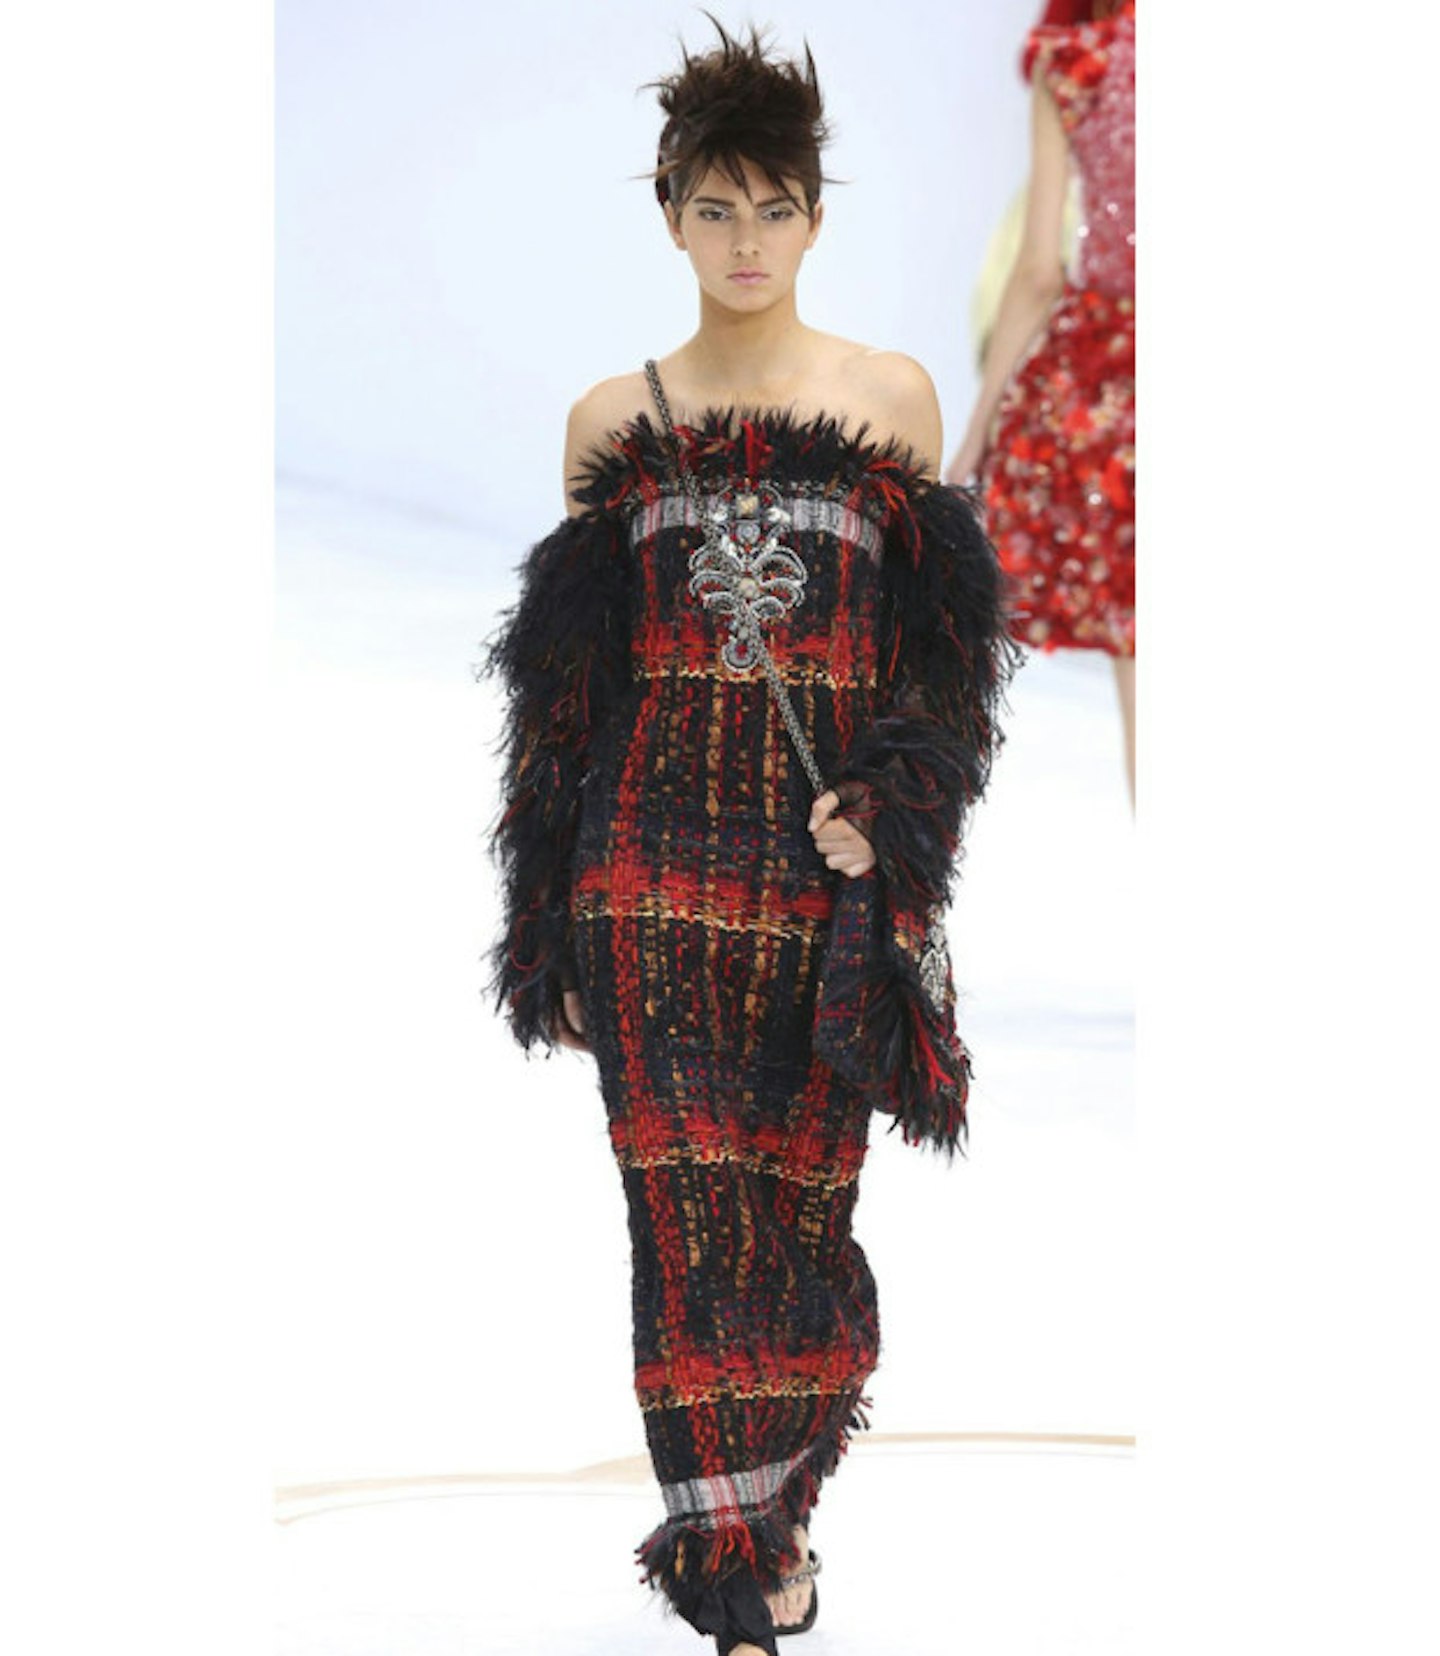 kendall-jenner-chanel-couture-aw-14-tartan-punk